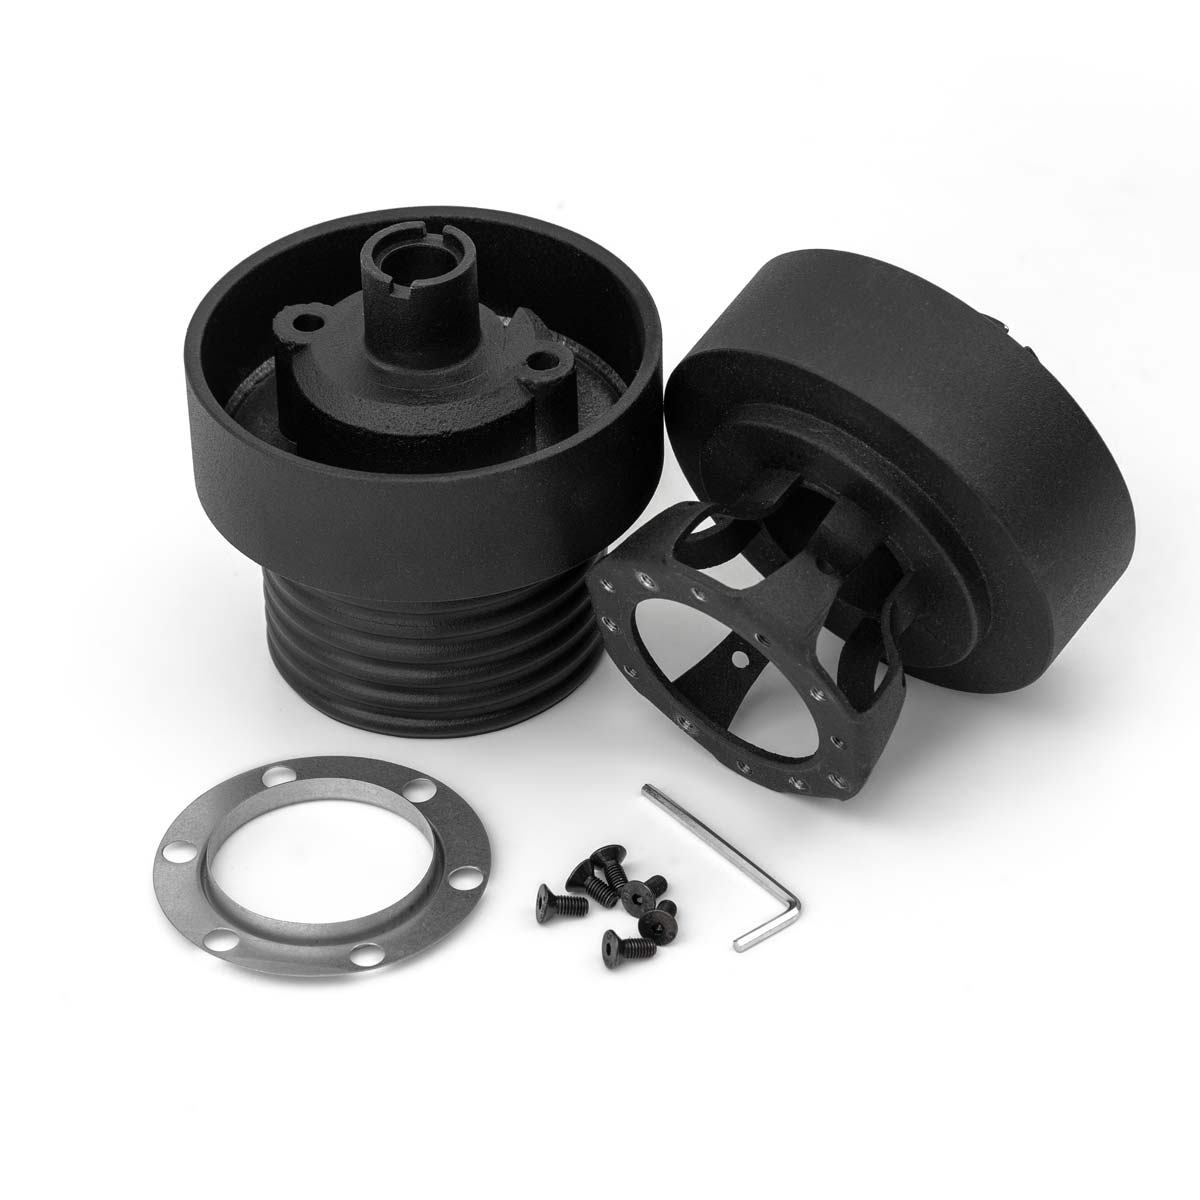 LUISI steering wheel hub Volvo 780 up to 1991 (TÜV-compliant deformable / 6x74mm 6x70mm)